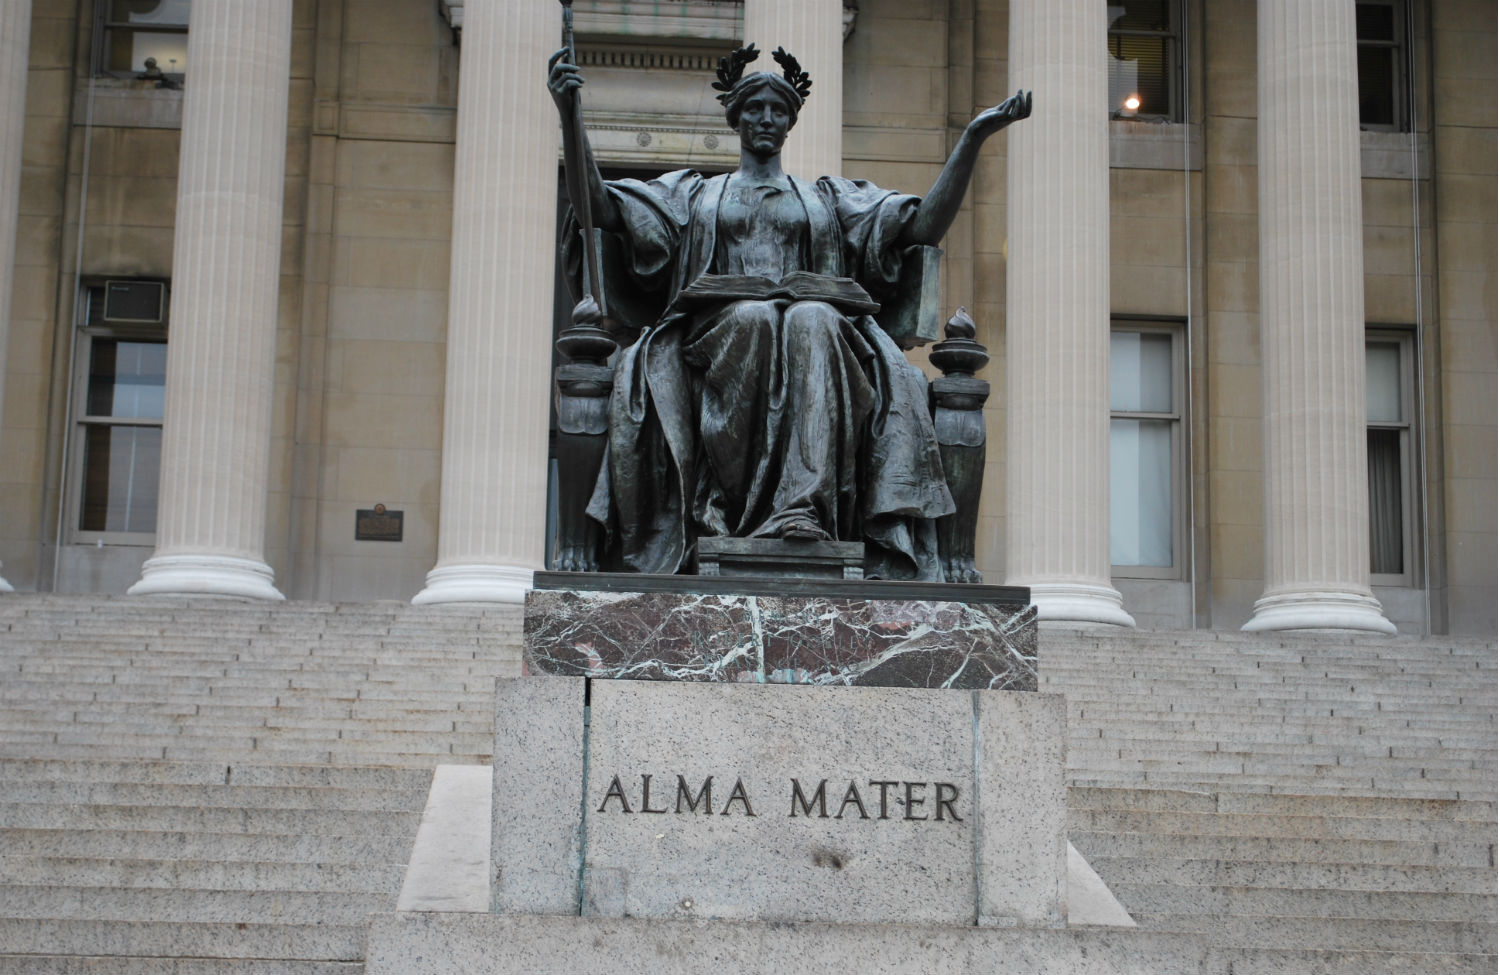 Columbia University Fired Two Eminent Public Intellectuals. Here’s Why It Matters.